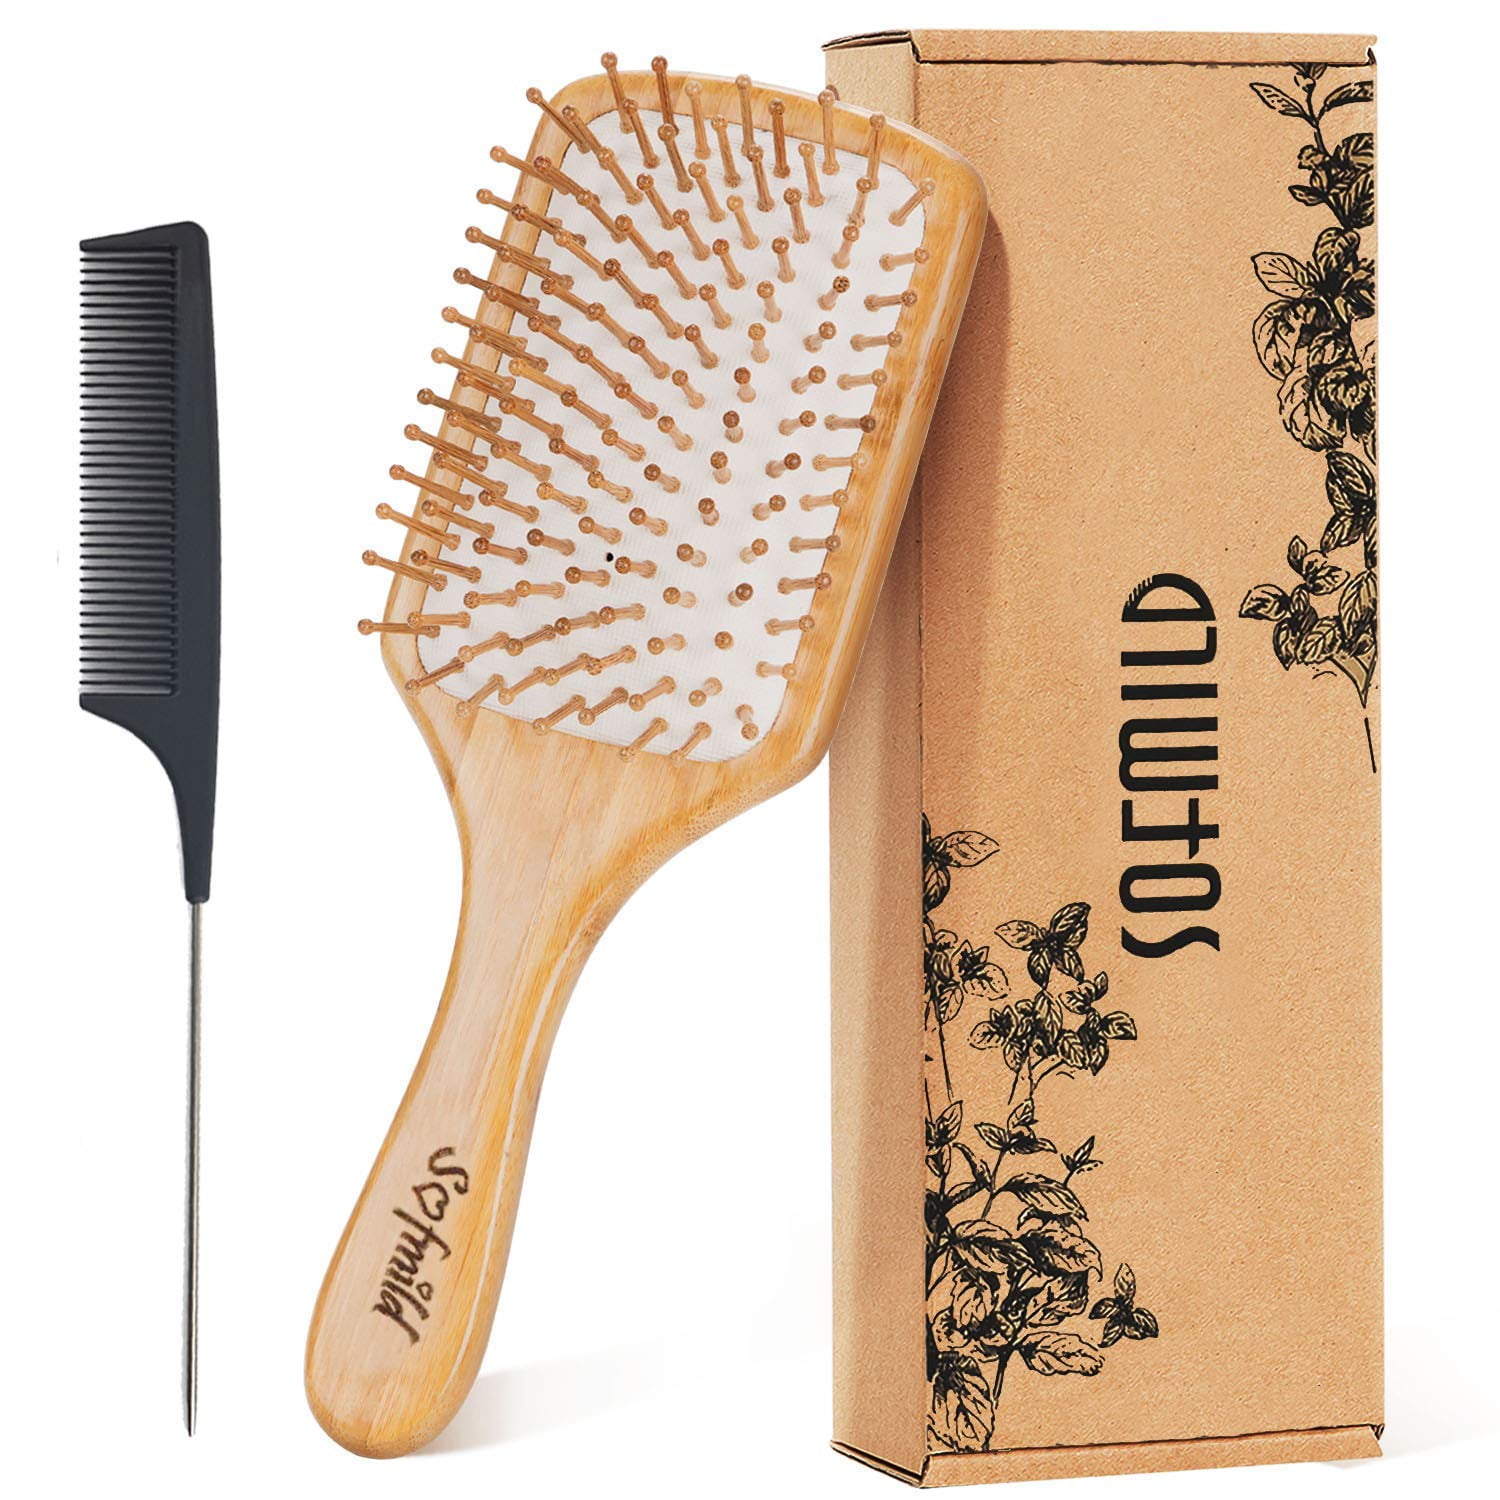 Meggie Magic Personal Care Bamboo Hair Brush & Two-sided Hand and Nail  Brush. Wooden Hairbrush Massage Scalp, Fingernail Brush for Nail Cleaning  and Scrubbing, …